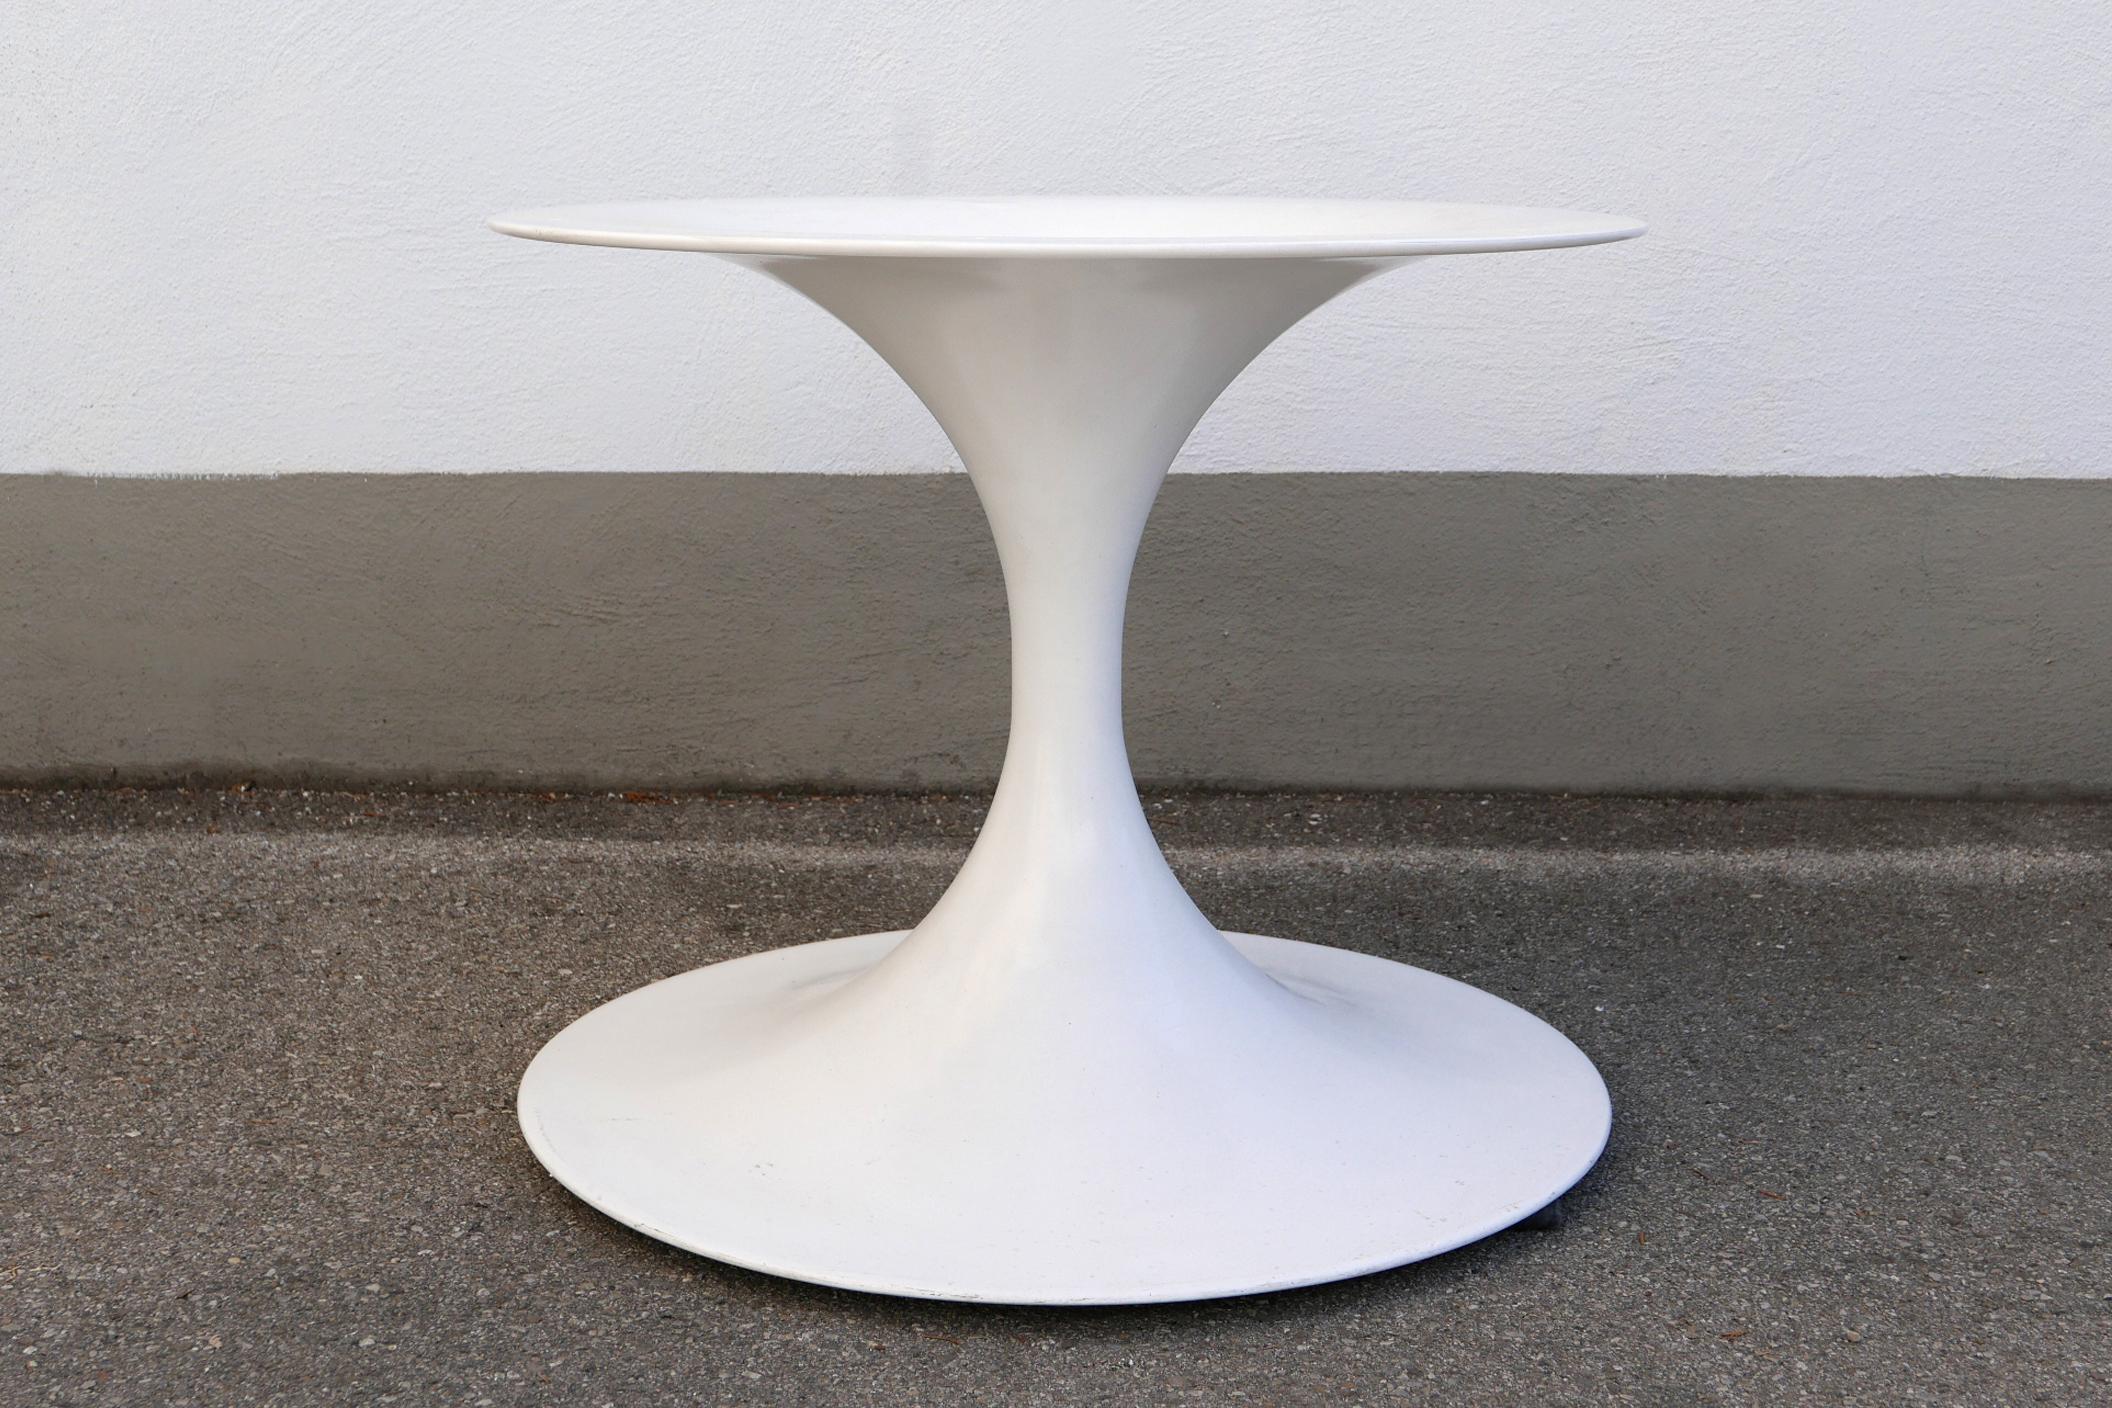 Rare Mid-Century Modern Tulip Base Marble Coffee Table by Honsel, Germany, 1960s For Sale 9